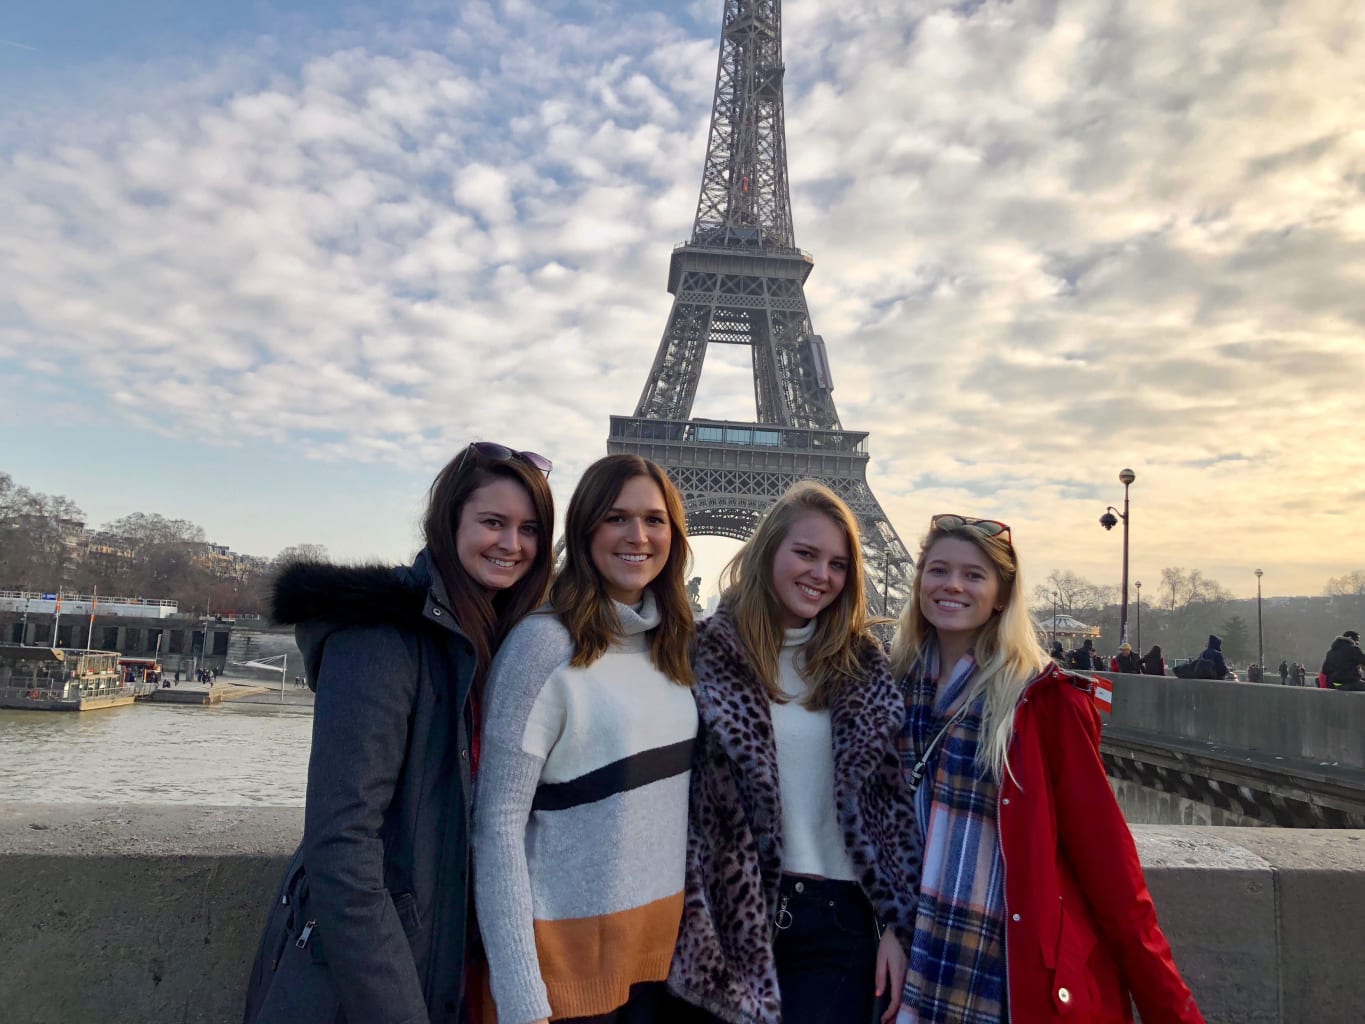 Four women in front of the Eiffel Tower in Paris.